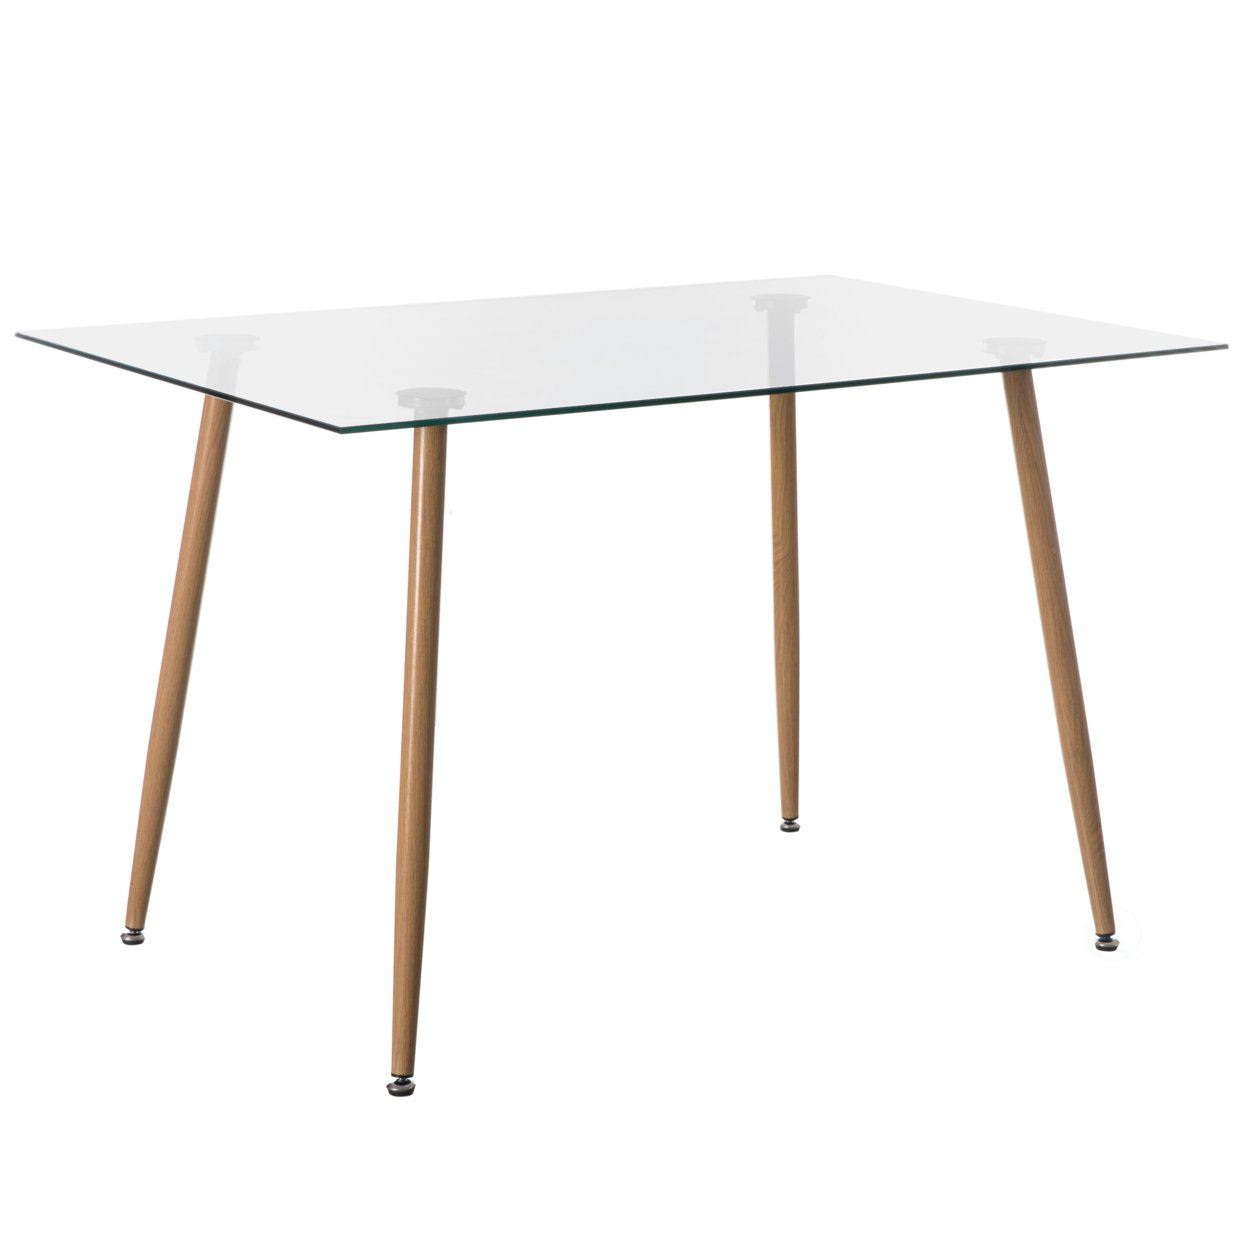 Fabulaxe Rectangle Glass Top Accent Dining Table with Solid Wood Legs Modern Space Saving Small Leisure Tea Desk